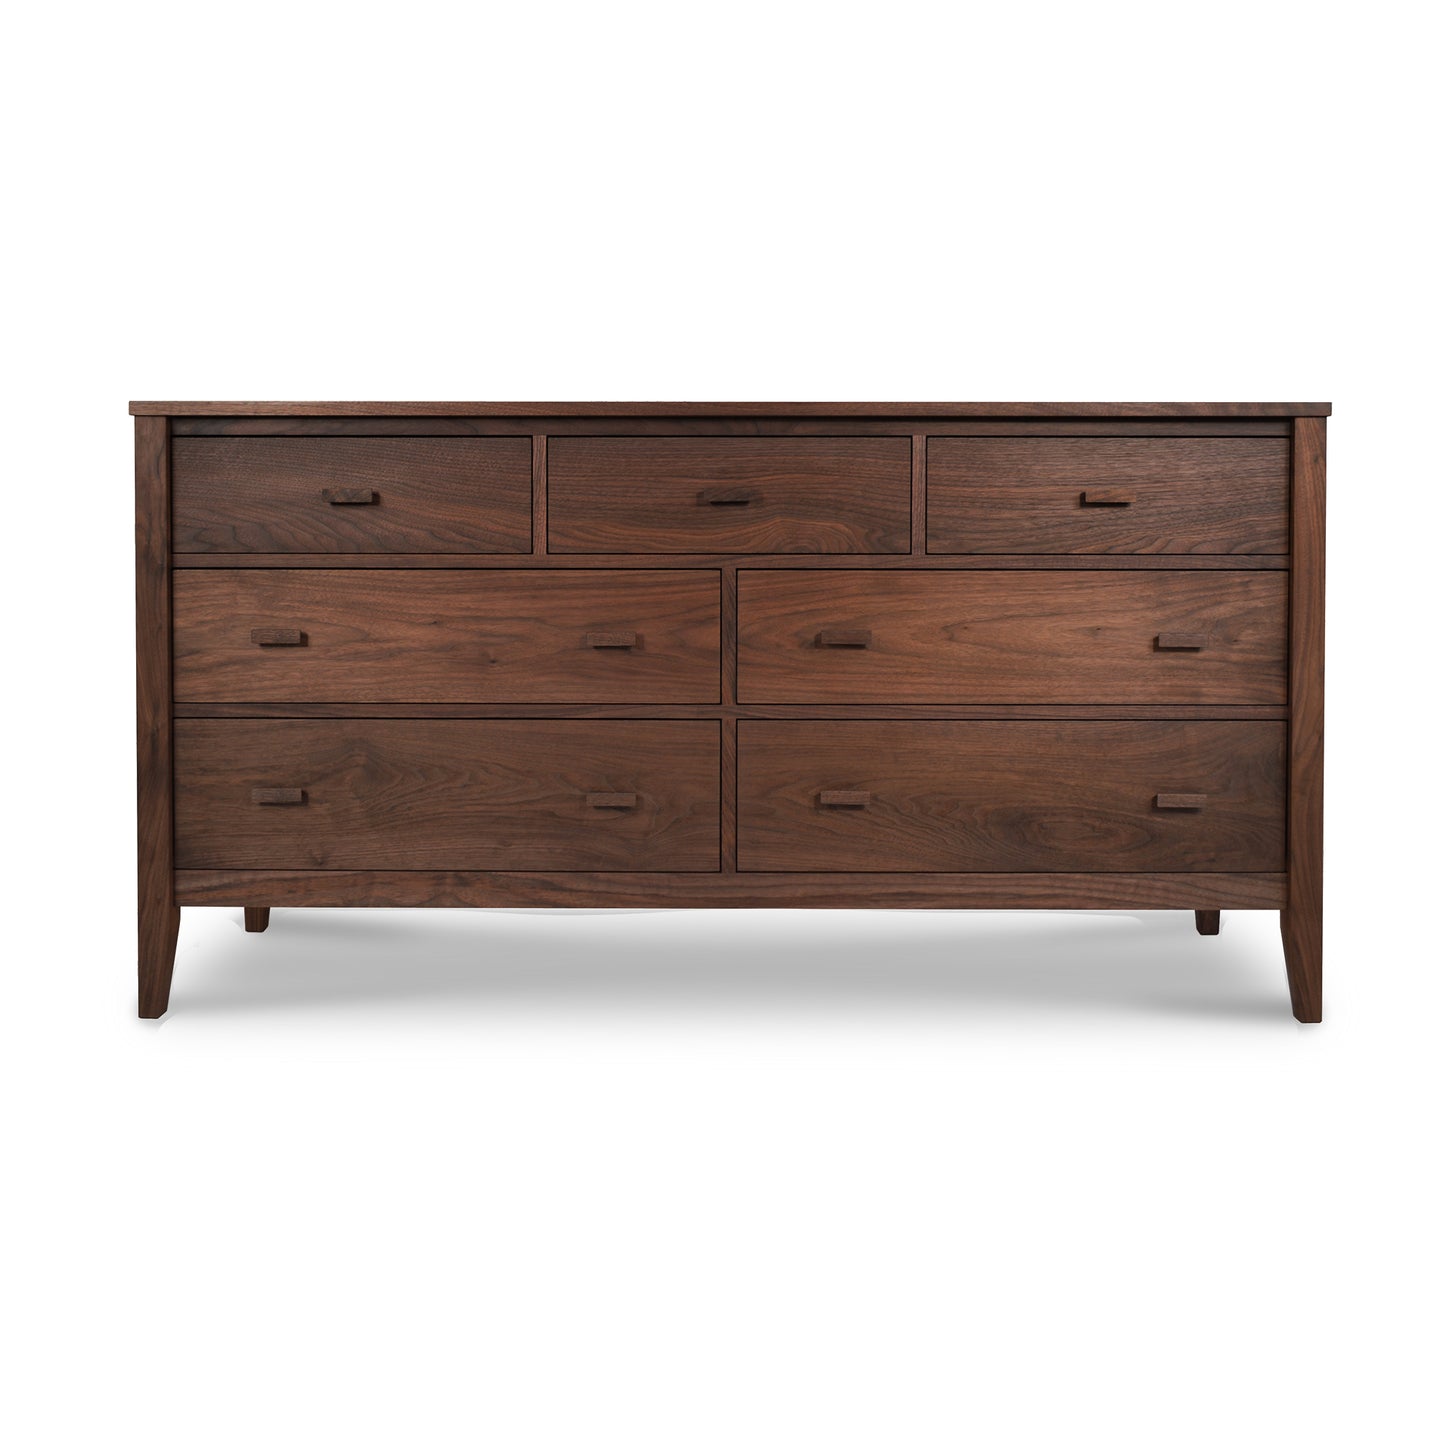 A large wooden Maple Corner Woodworks Andover Modern 7-Drawer Dresser, featuring a rich dark brown finish and slightly tapered legs, isolated on a white background.